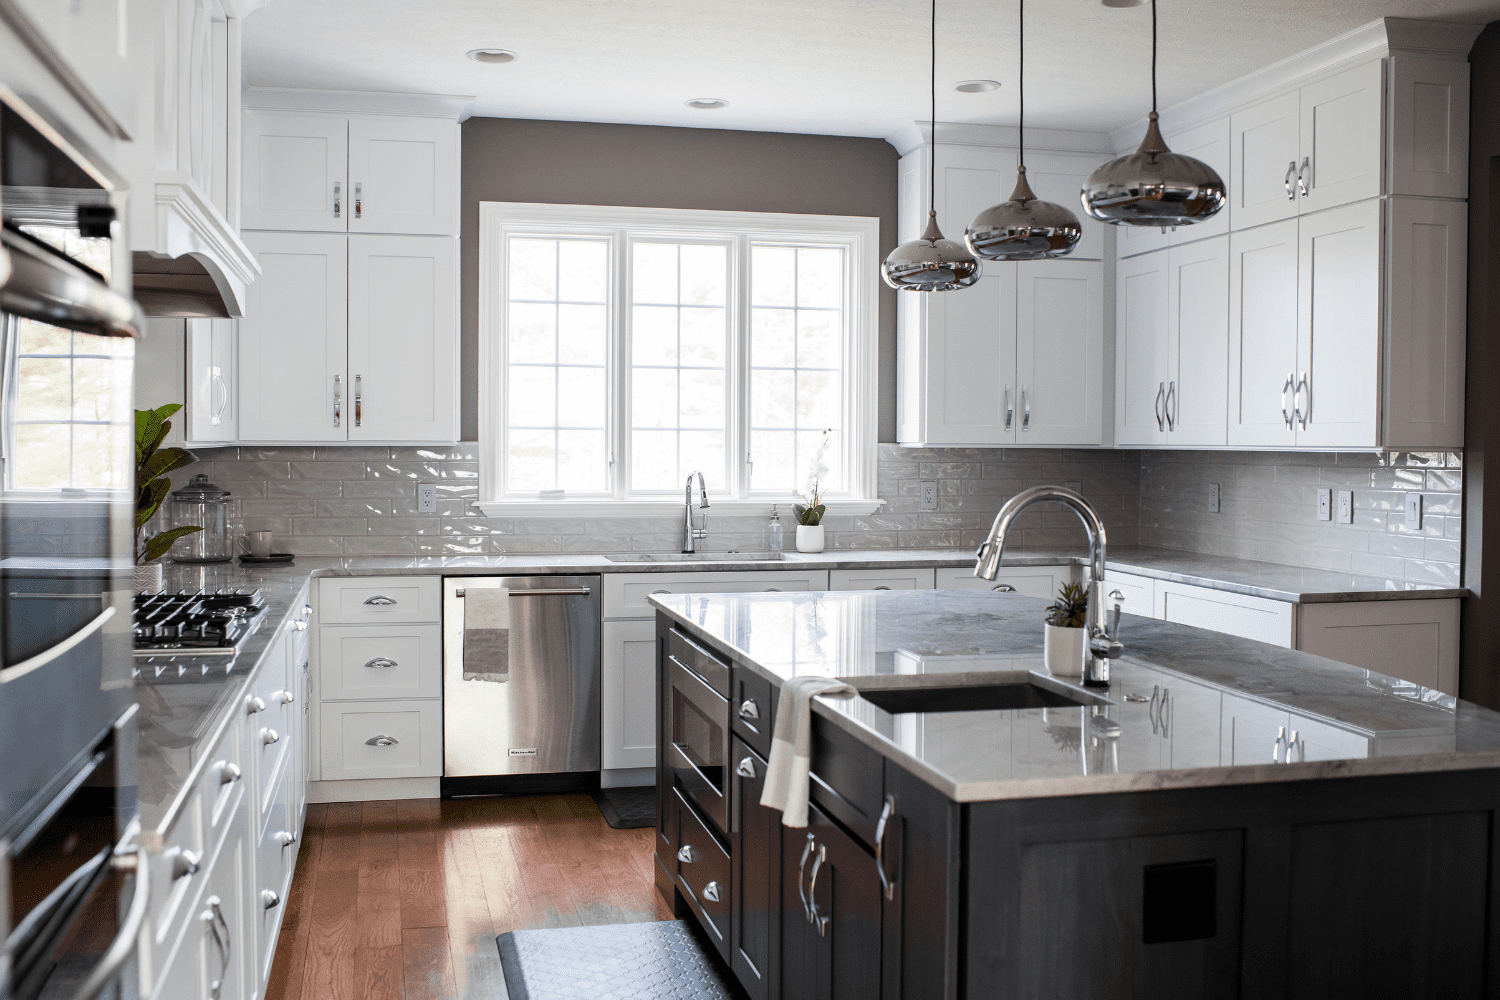 Nicholas Design Build | A kitchen with white cabinets and black counter tops.